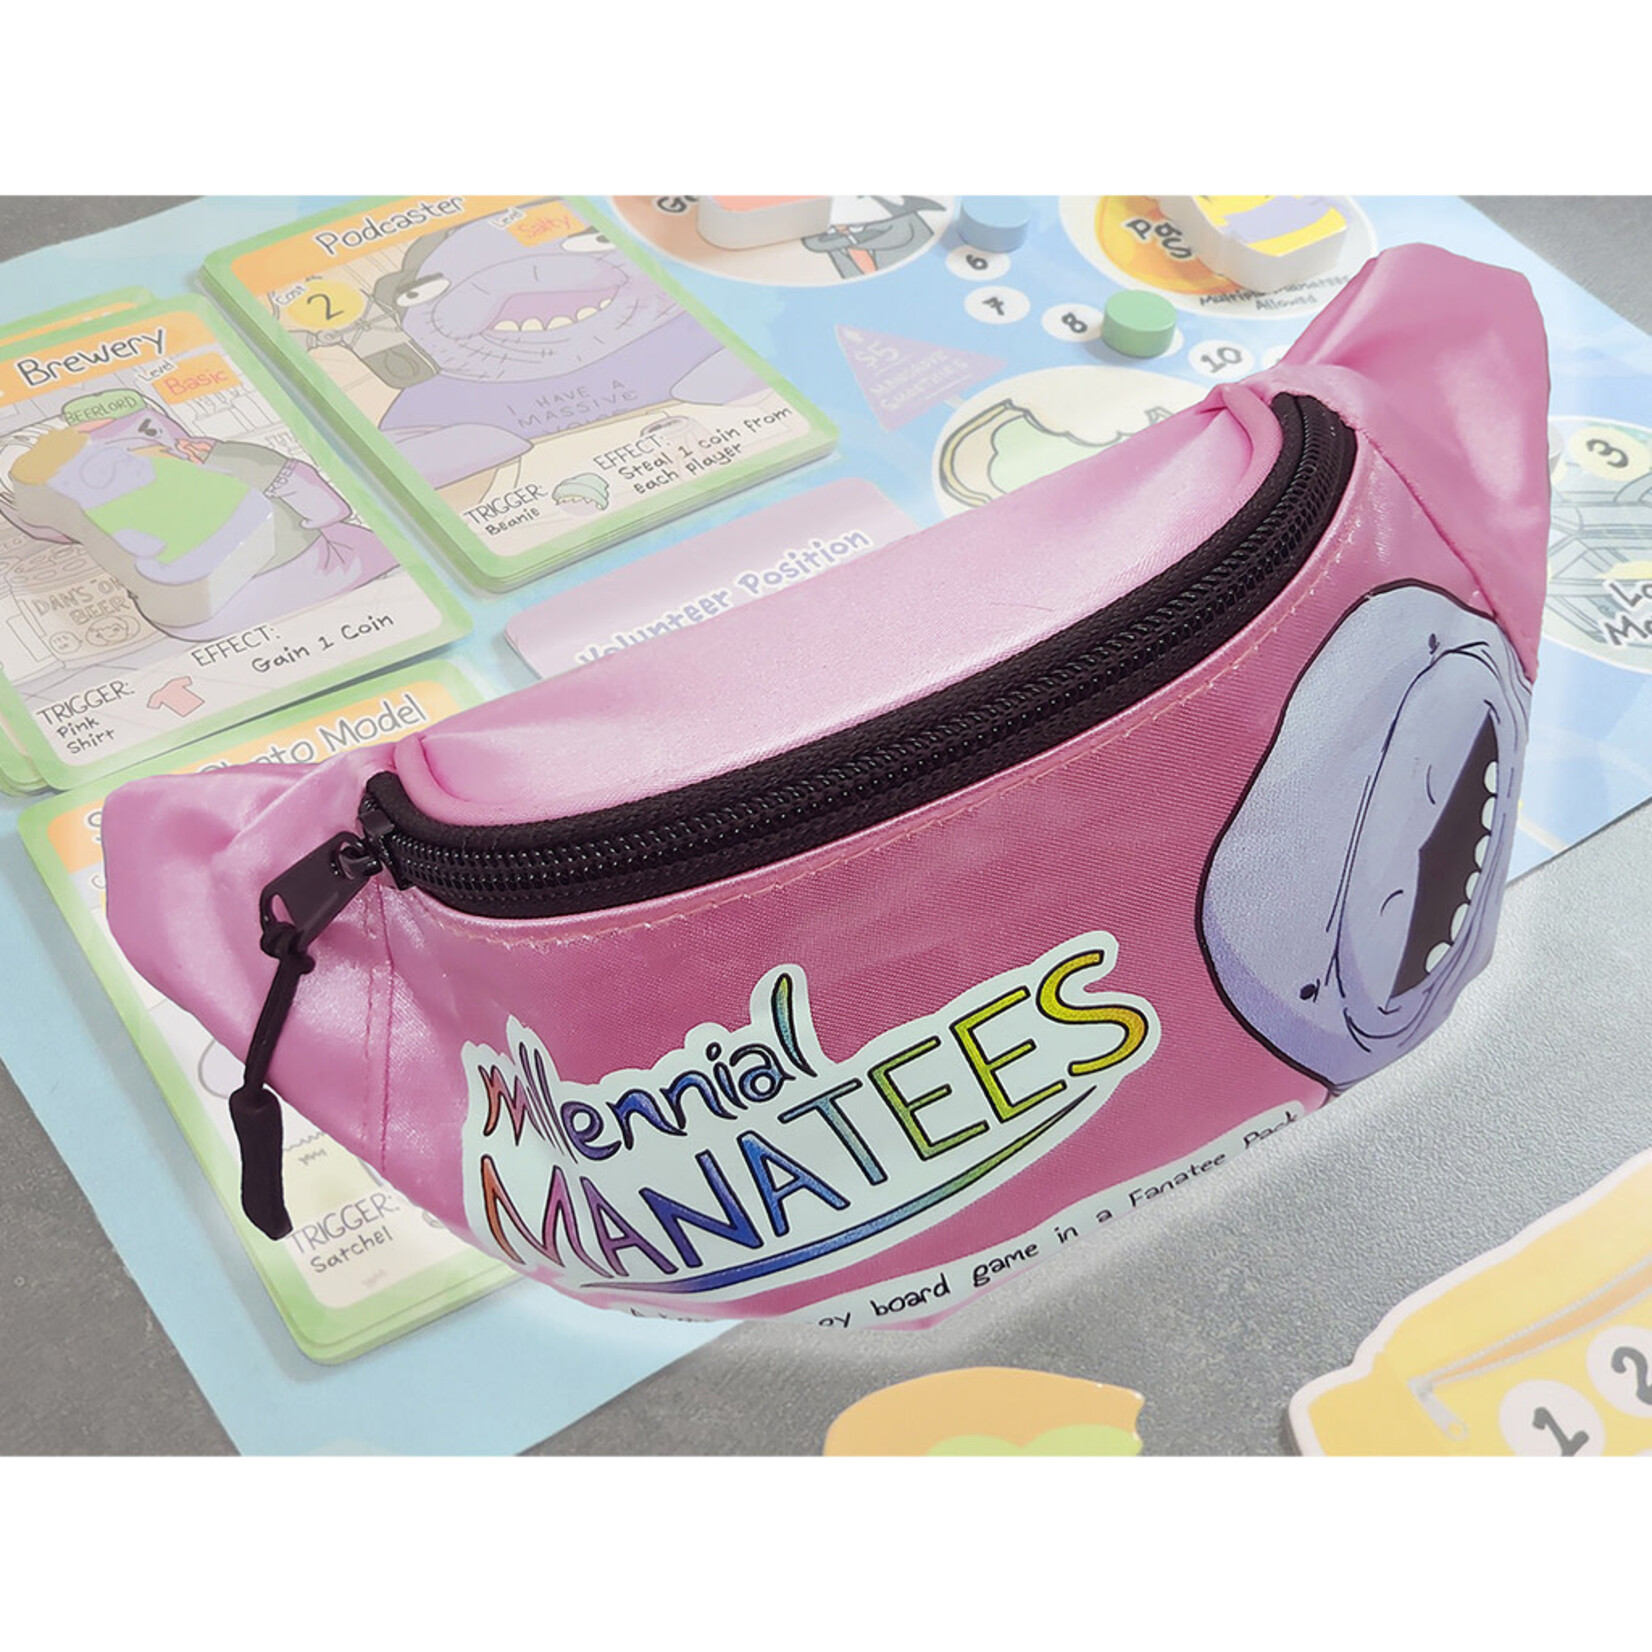 Millenial Manatees Board Game in a Fanatee Pack